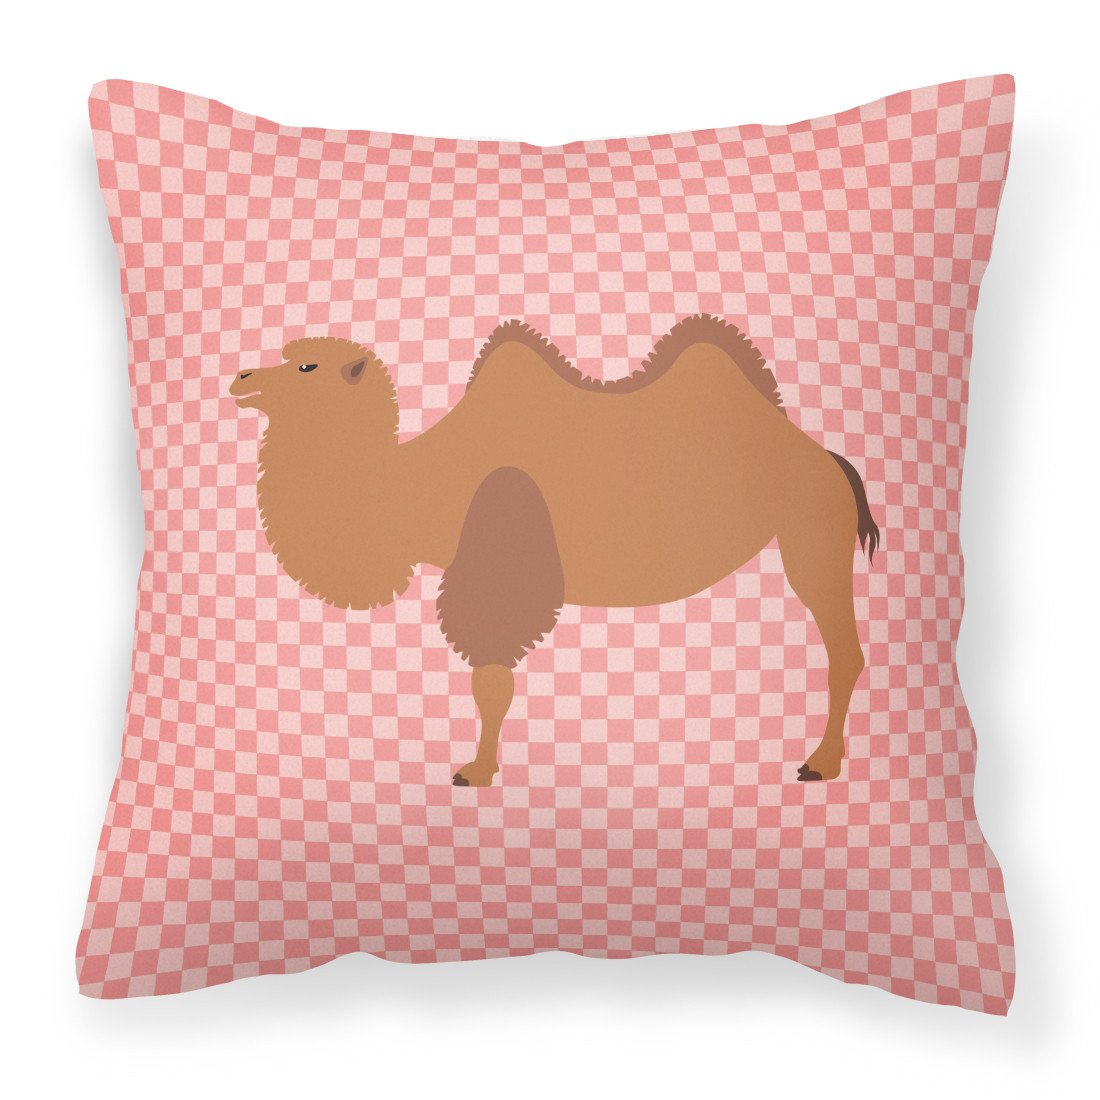 Bactrian Camel Pink Check Fabric Decorative Pillow BB7818PW1818 by Caroline's Treasures